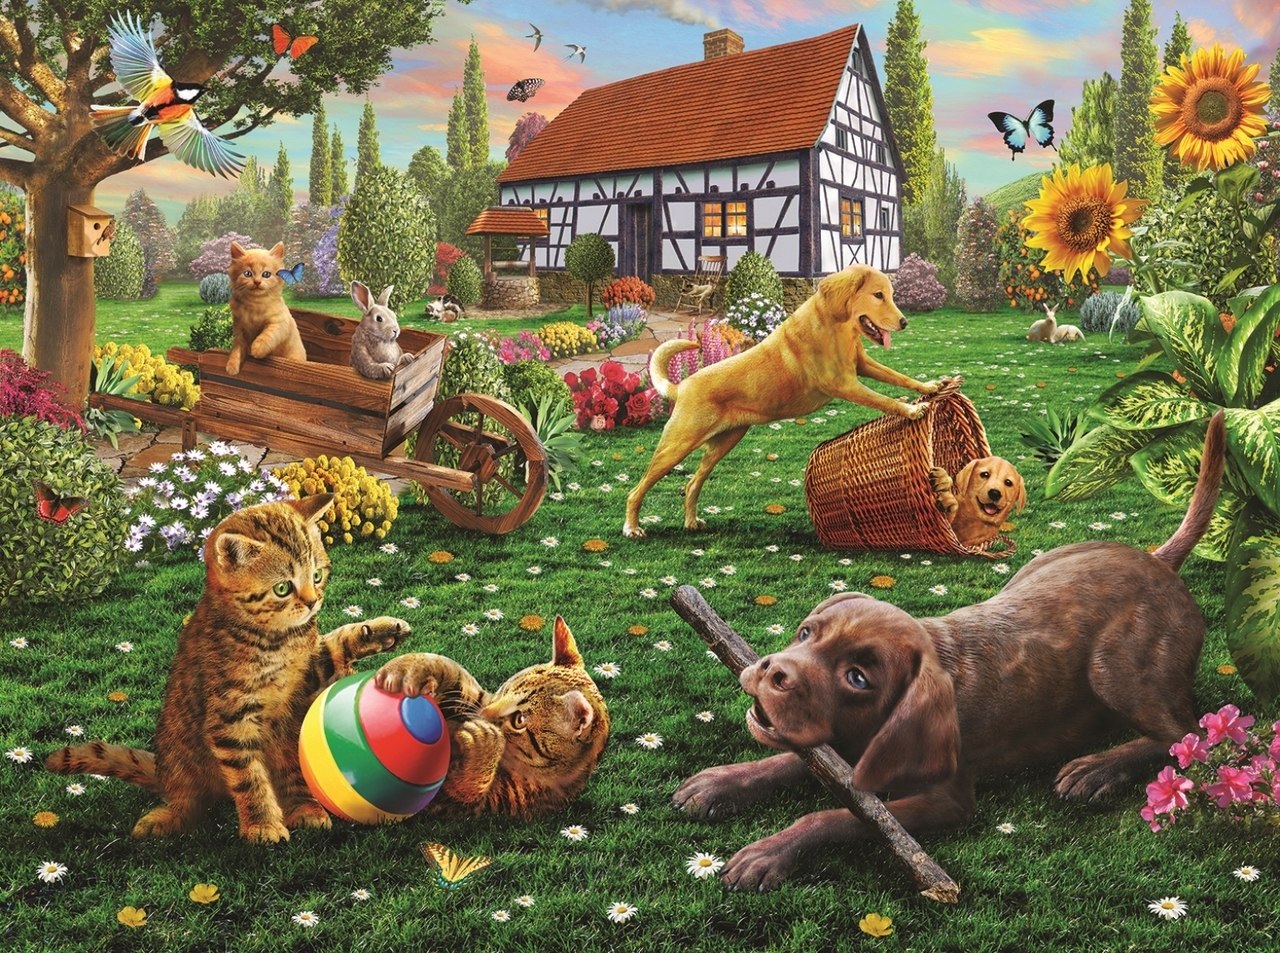 Dogs and Cats at Play - 1000pc Jigsaw Puzzle By Sunsout  			  					NEW